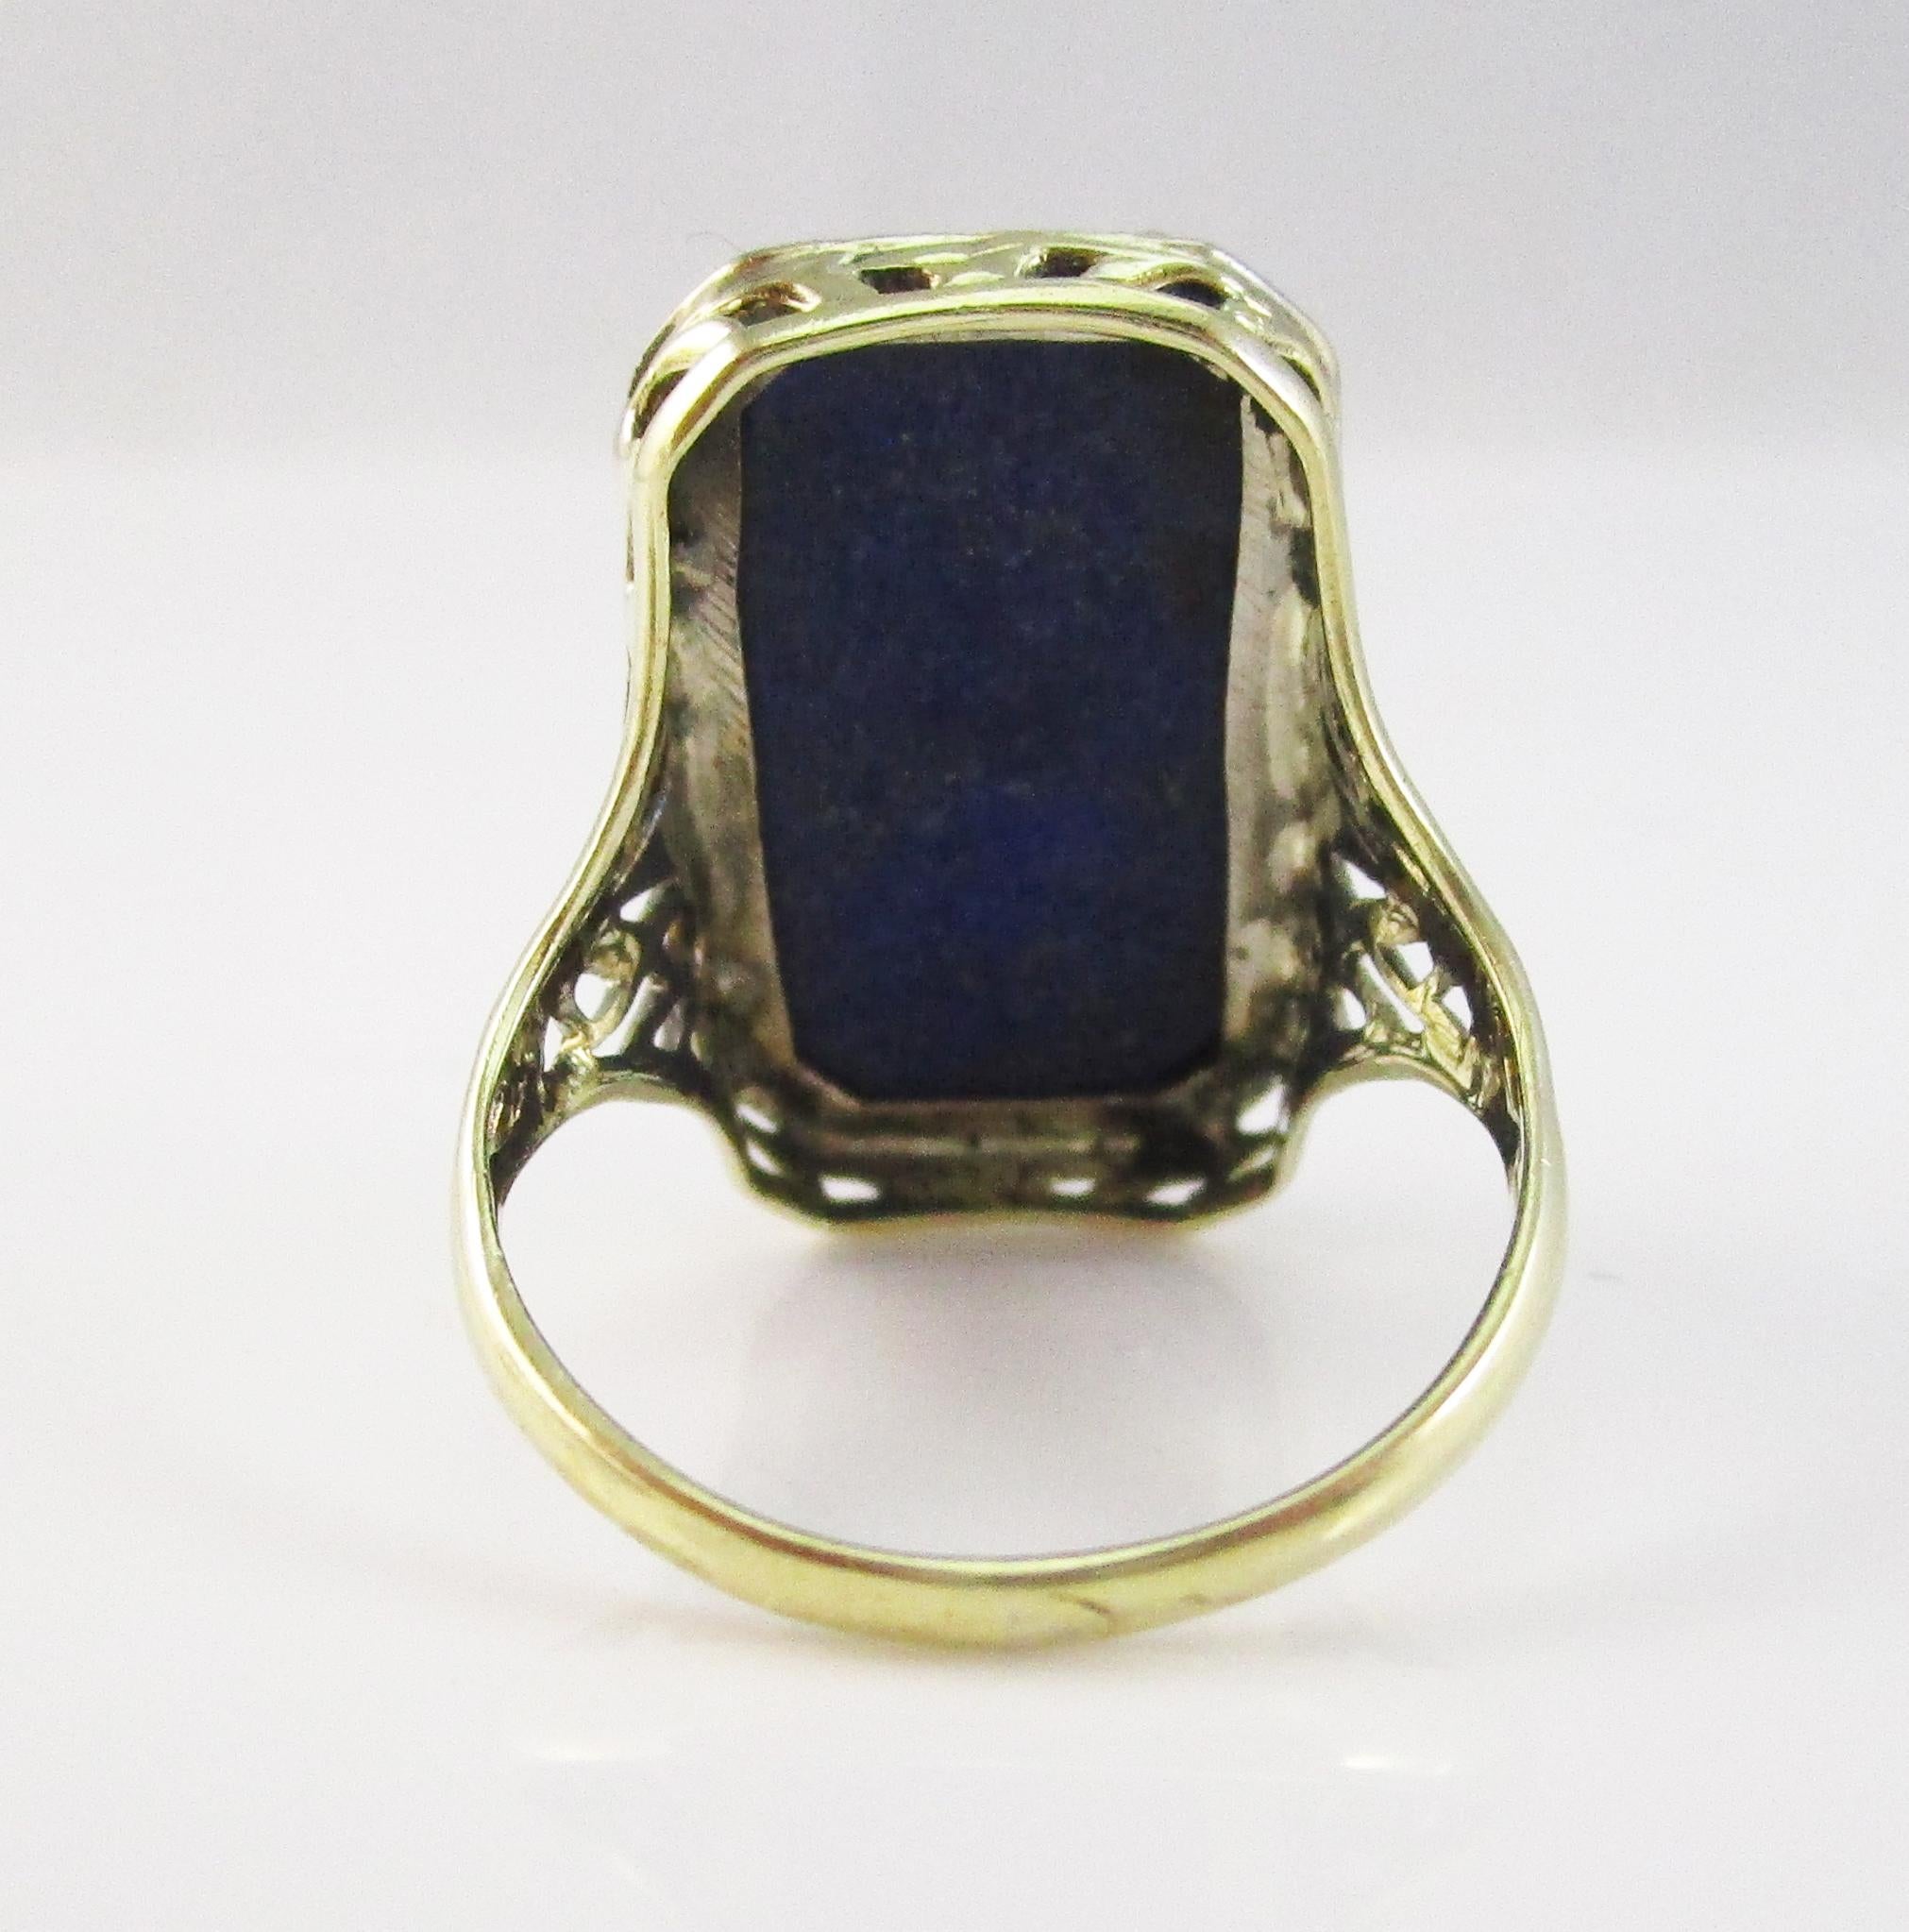 Edwardian 14K White and Green Gold Filigree Faceted Blue Lapis Statement Ring 1